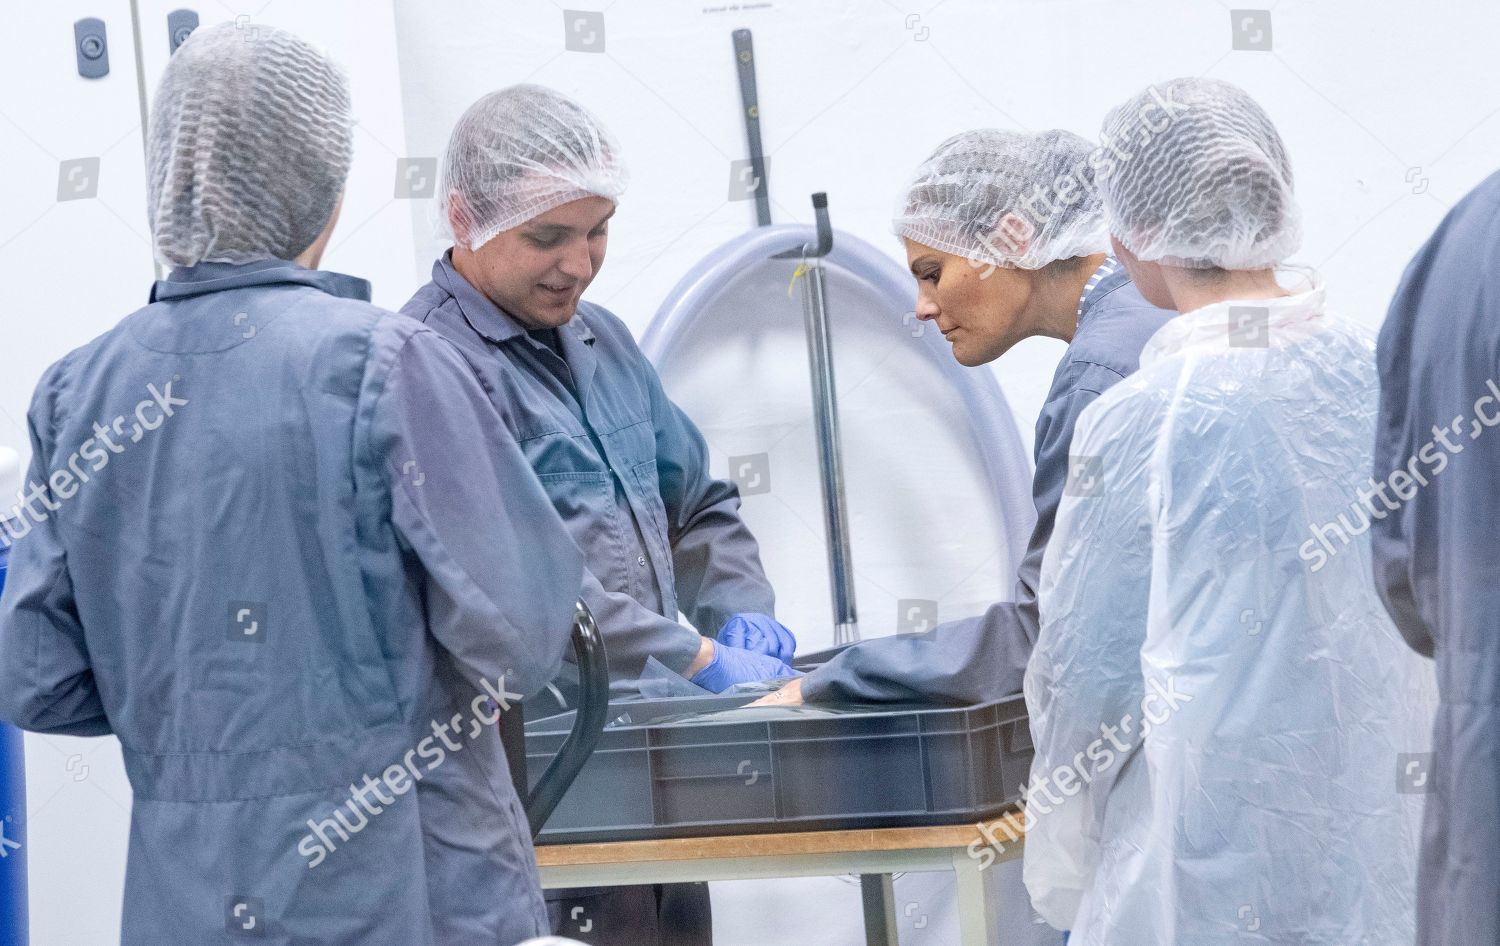 crown-princess-victoria-visits-the-centre-for-marine-research-simrishamn-sweden-shutterstock-editorial-10369010as.jpg